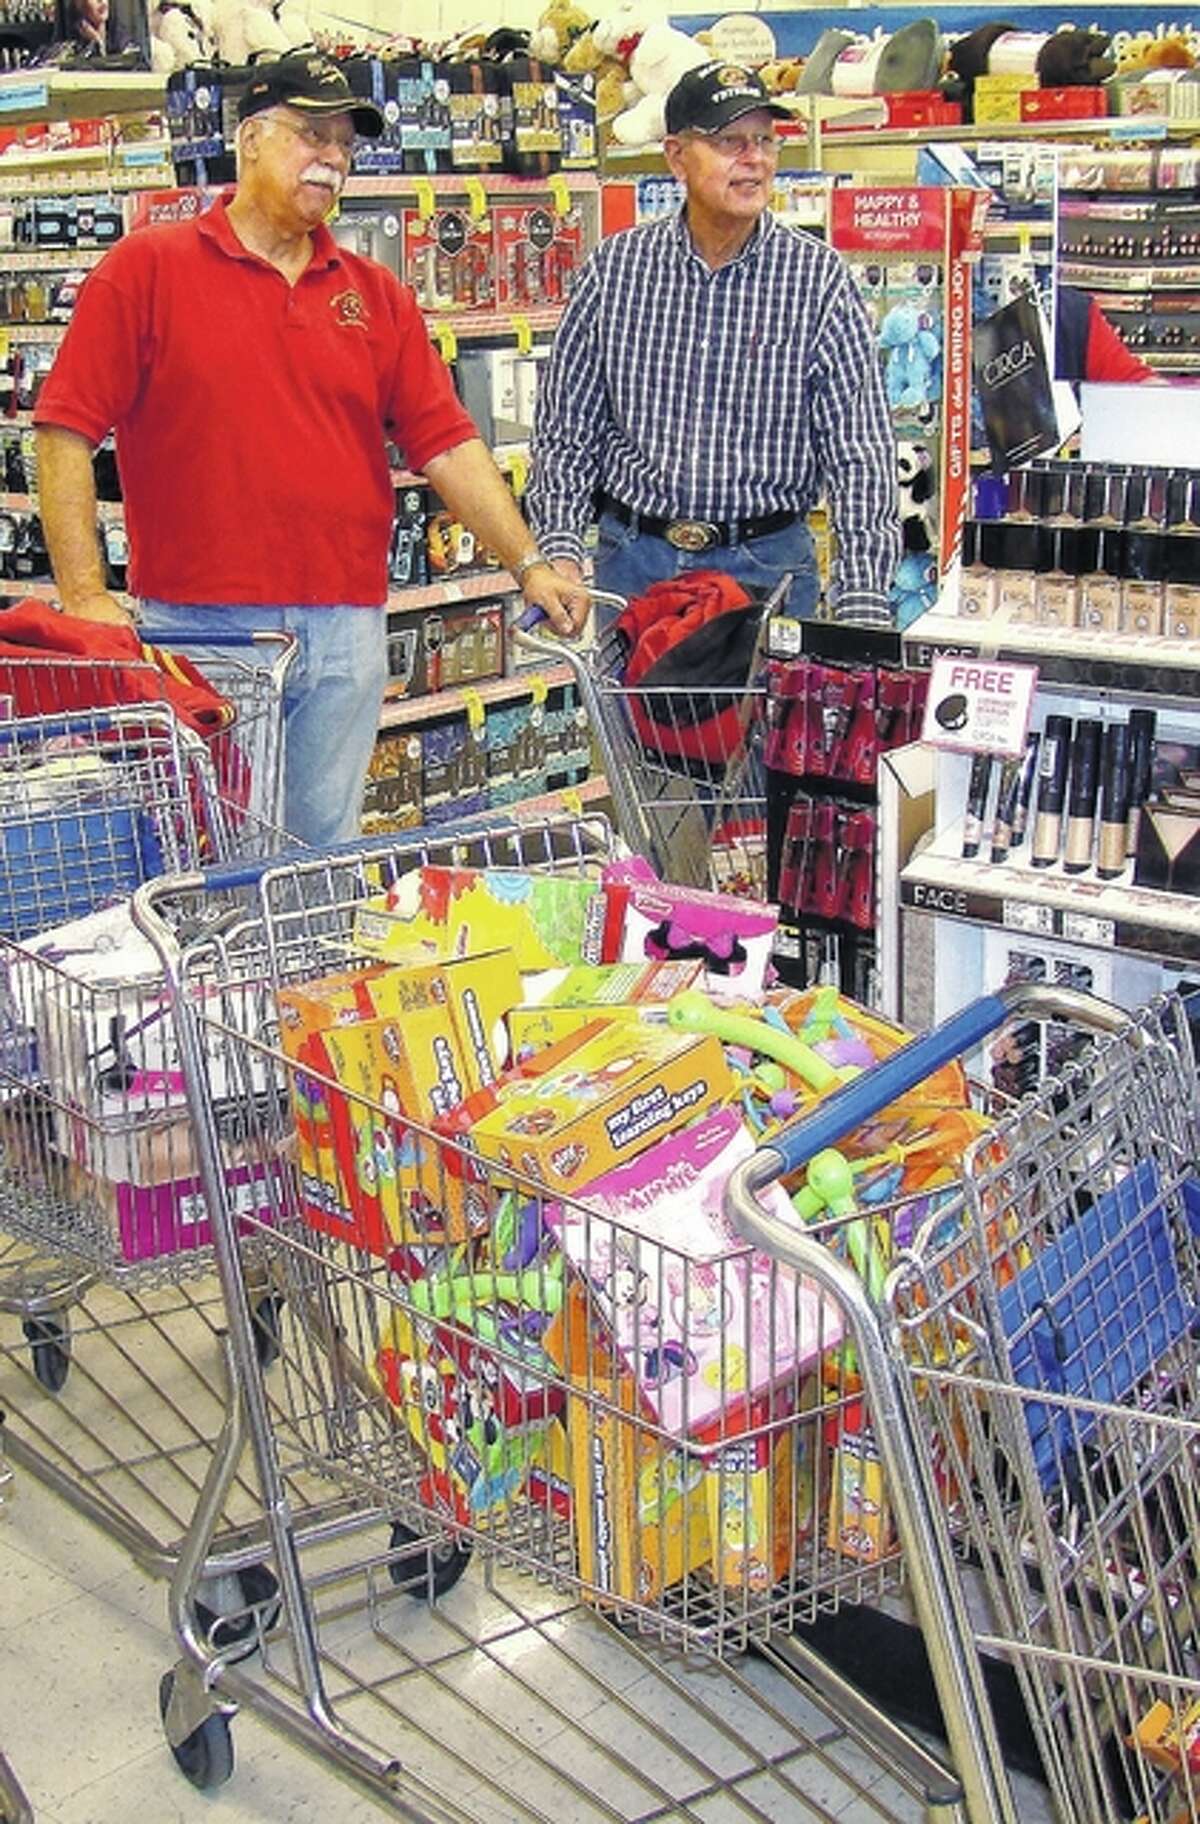 Roger Deem | Journal-Courier By the end of the shopping trip, members of the West Central Illinois Leathernecks of the Marine Corps League have collected several shopping carts filled with toys to add to those donated for the Toys for Tots campaign.